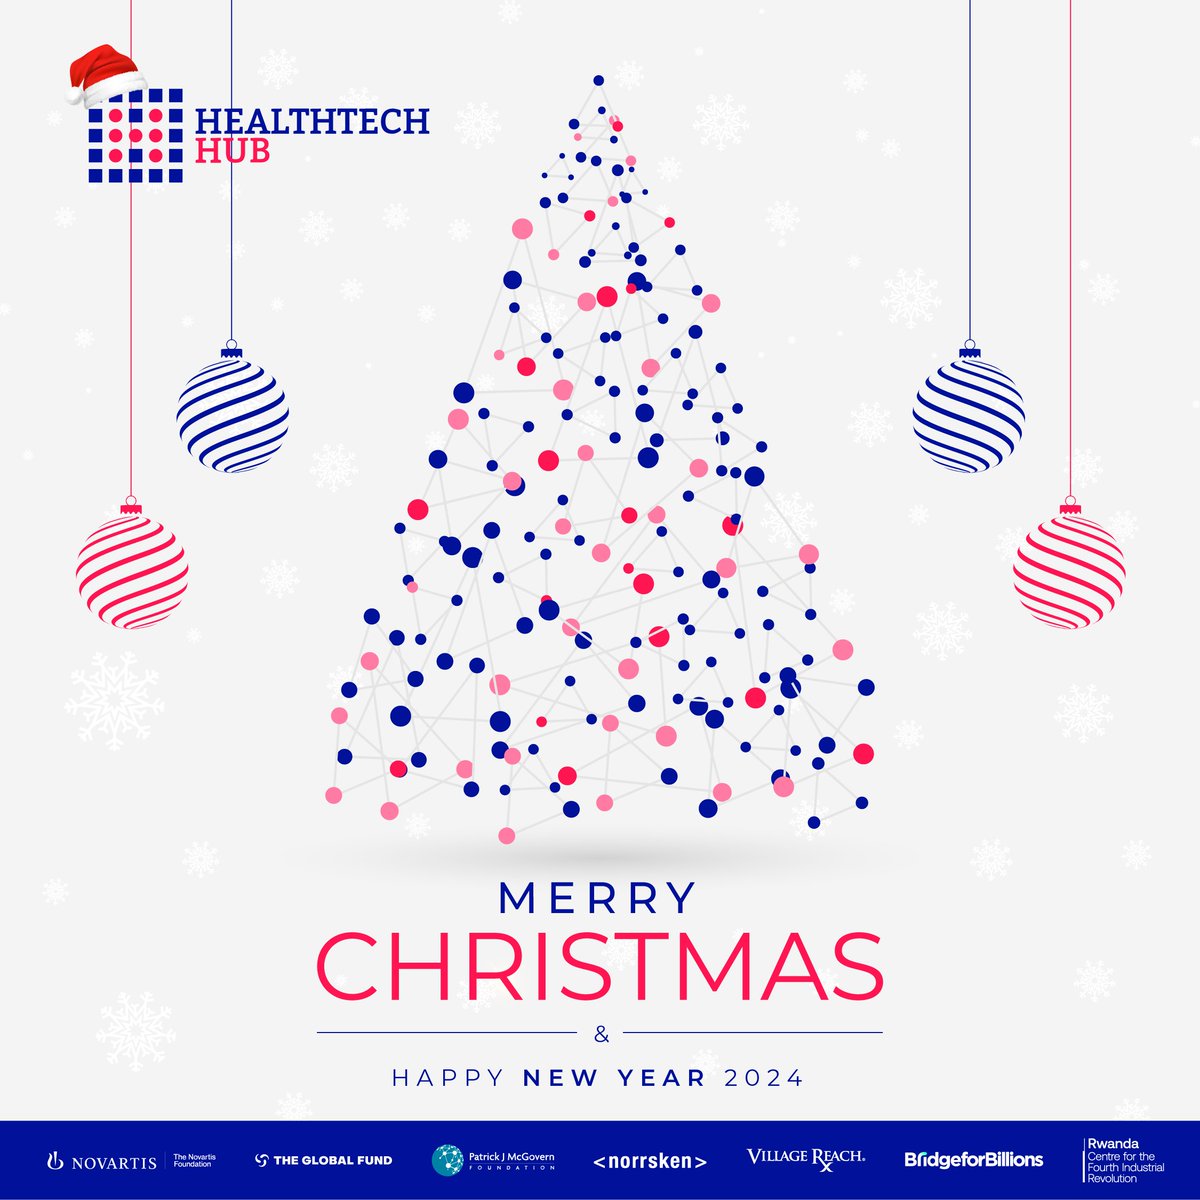 Merry Christmas from the HealthTech Hub Africa team! We sincerely thank you for your support as we strive for a healthier Africa. #HTHA #MerryChristmas #HealthTech